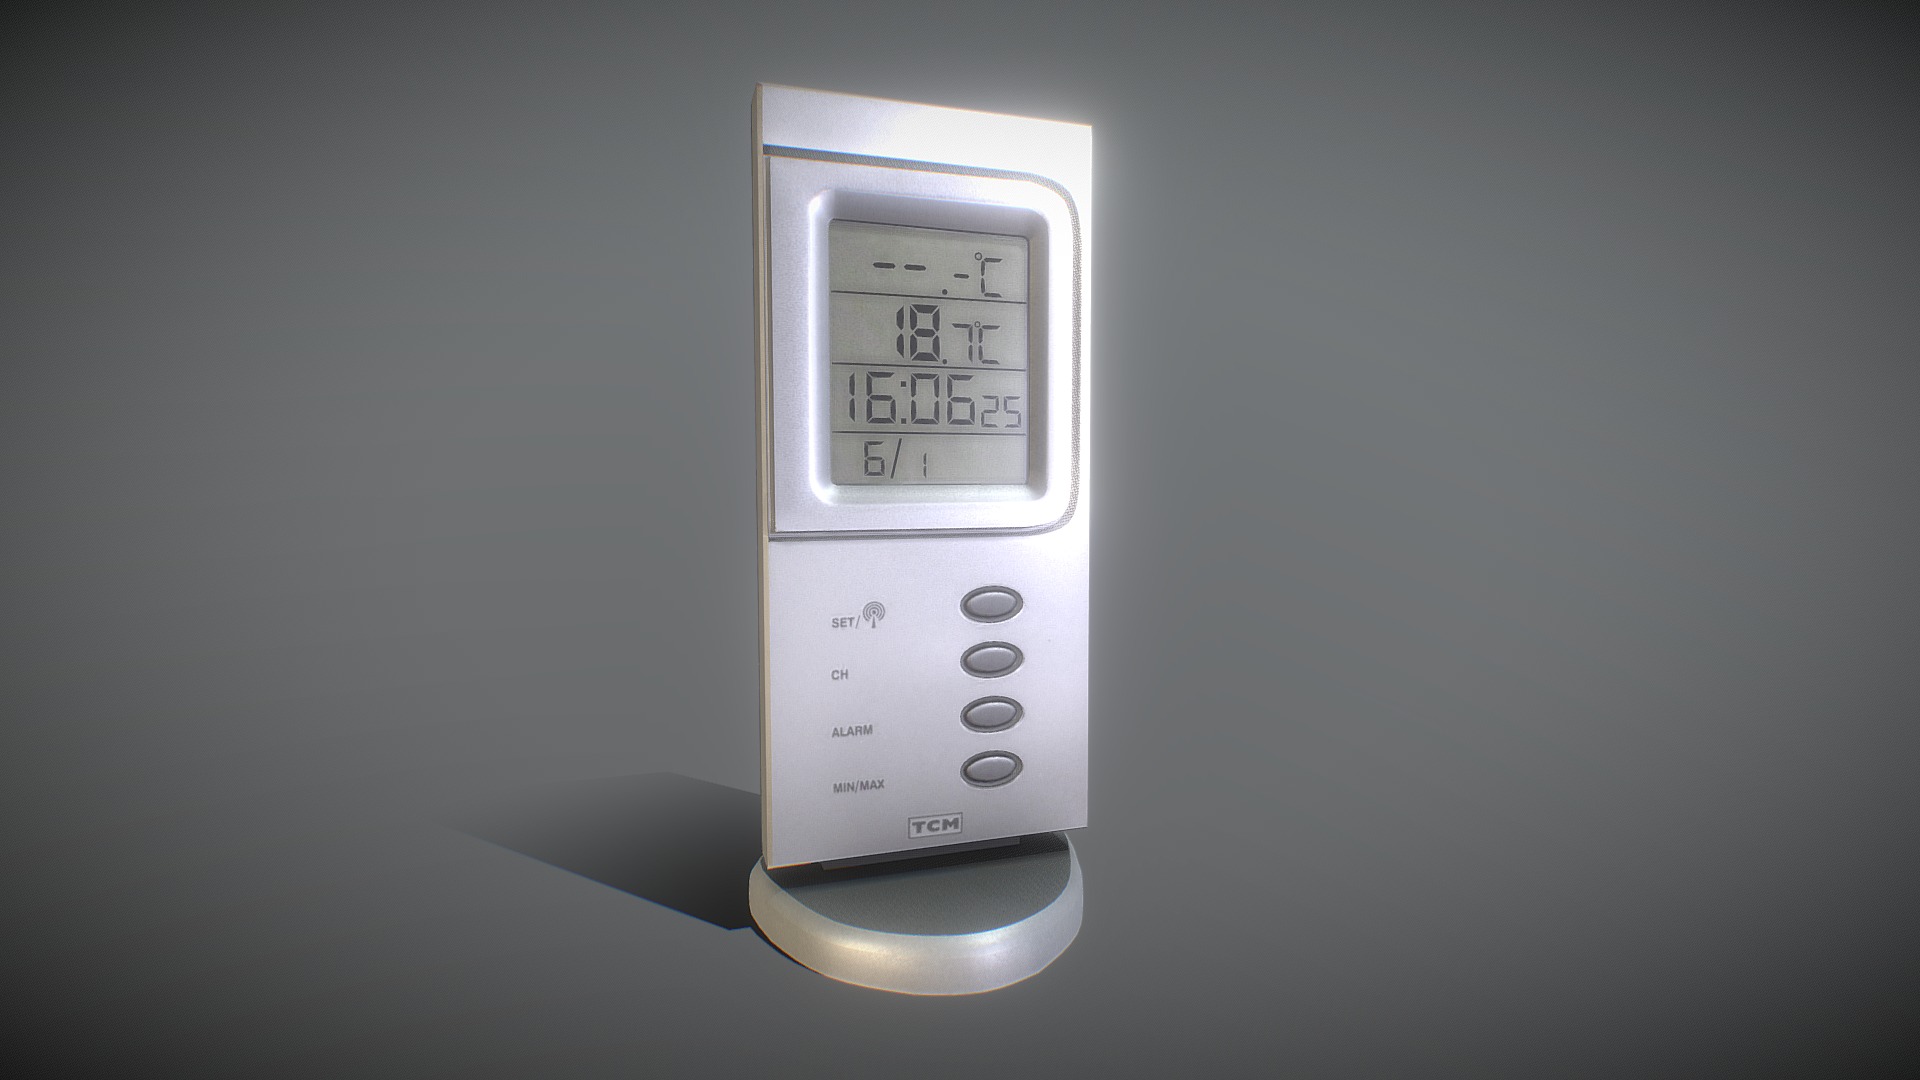 Here is a digital room thermometer and watch. 

Demo video













Made made with Blender 3d model